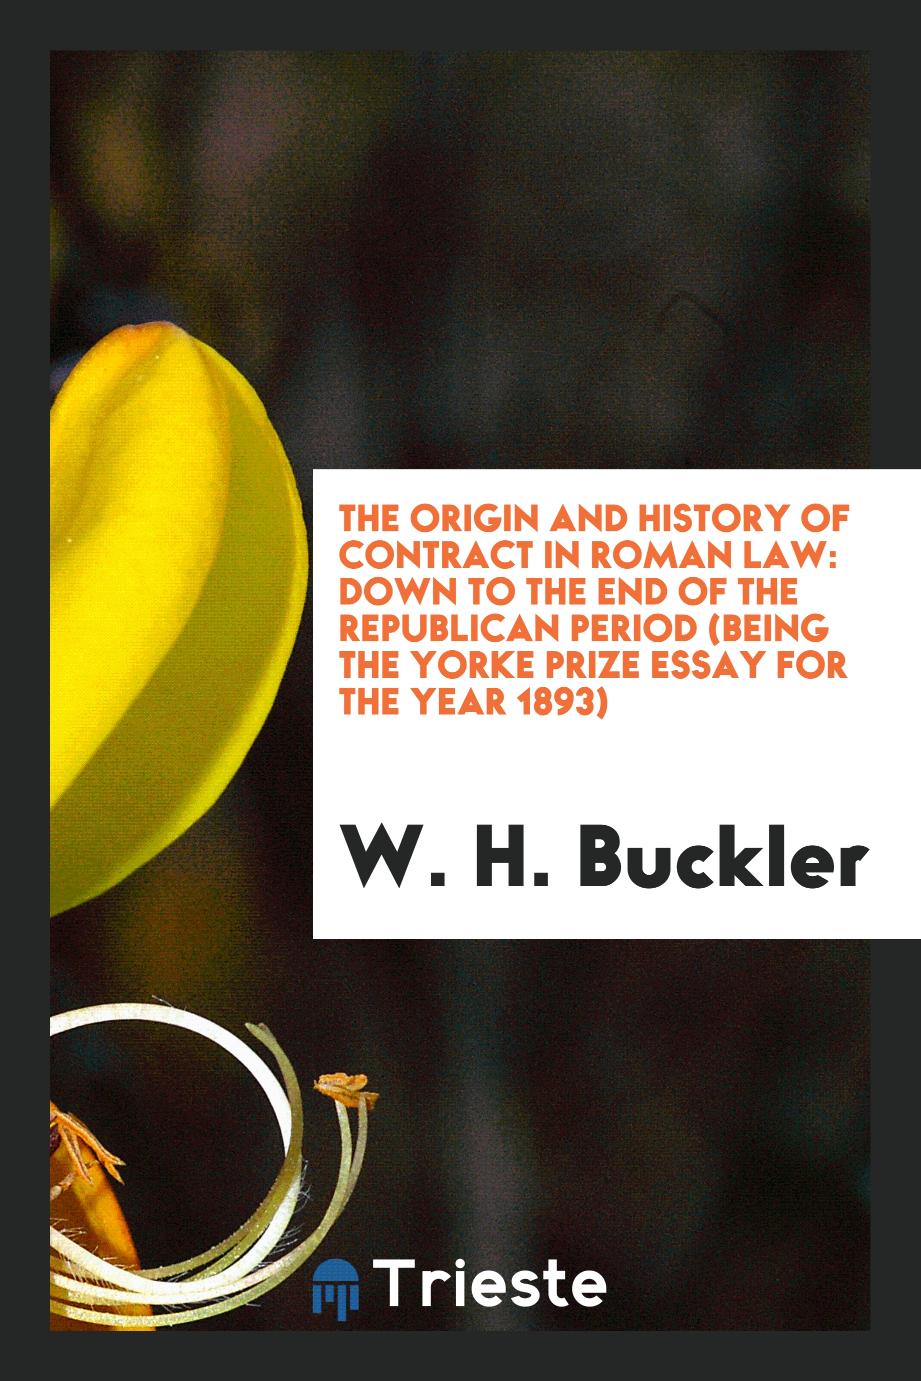 The Origin and History of Contract in Roman Law: Down to the End of the Republican Period (Being the Yorke Prize Essay for the Year 1893)